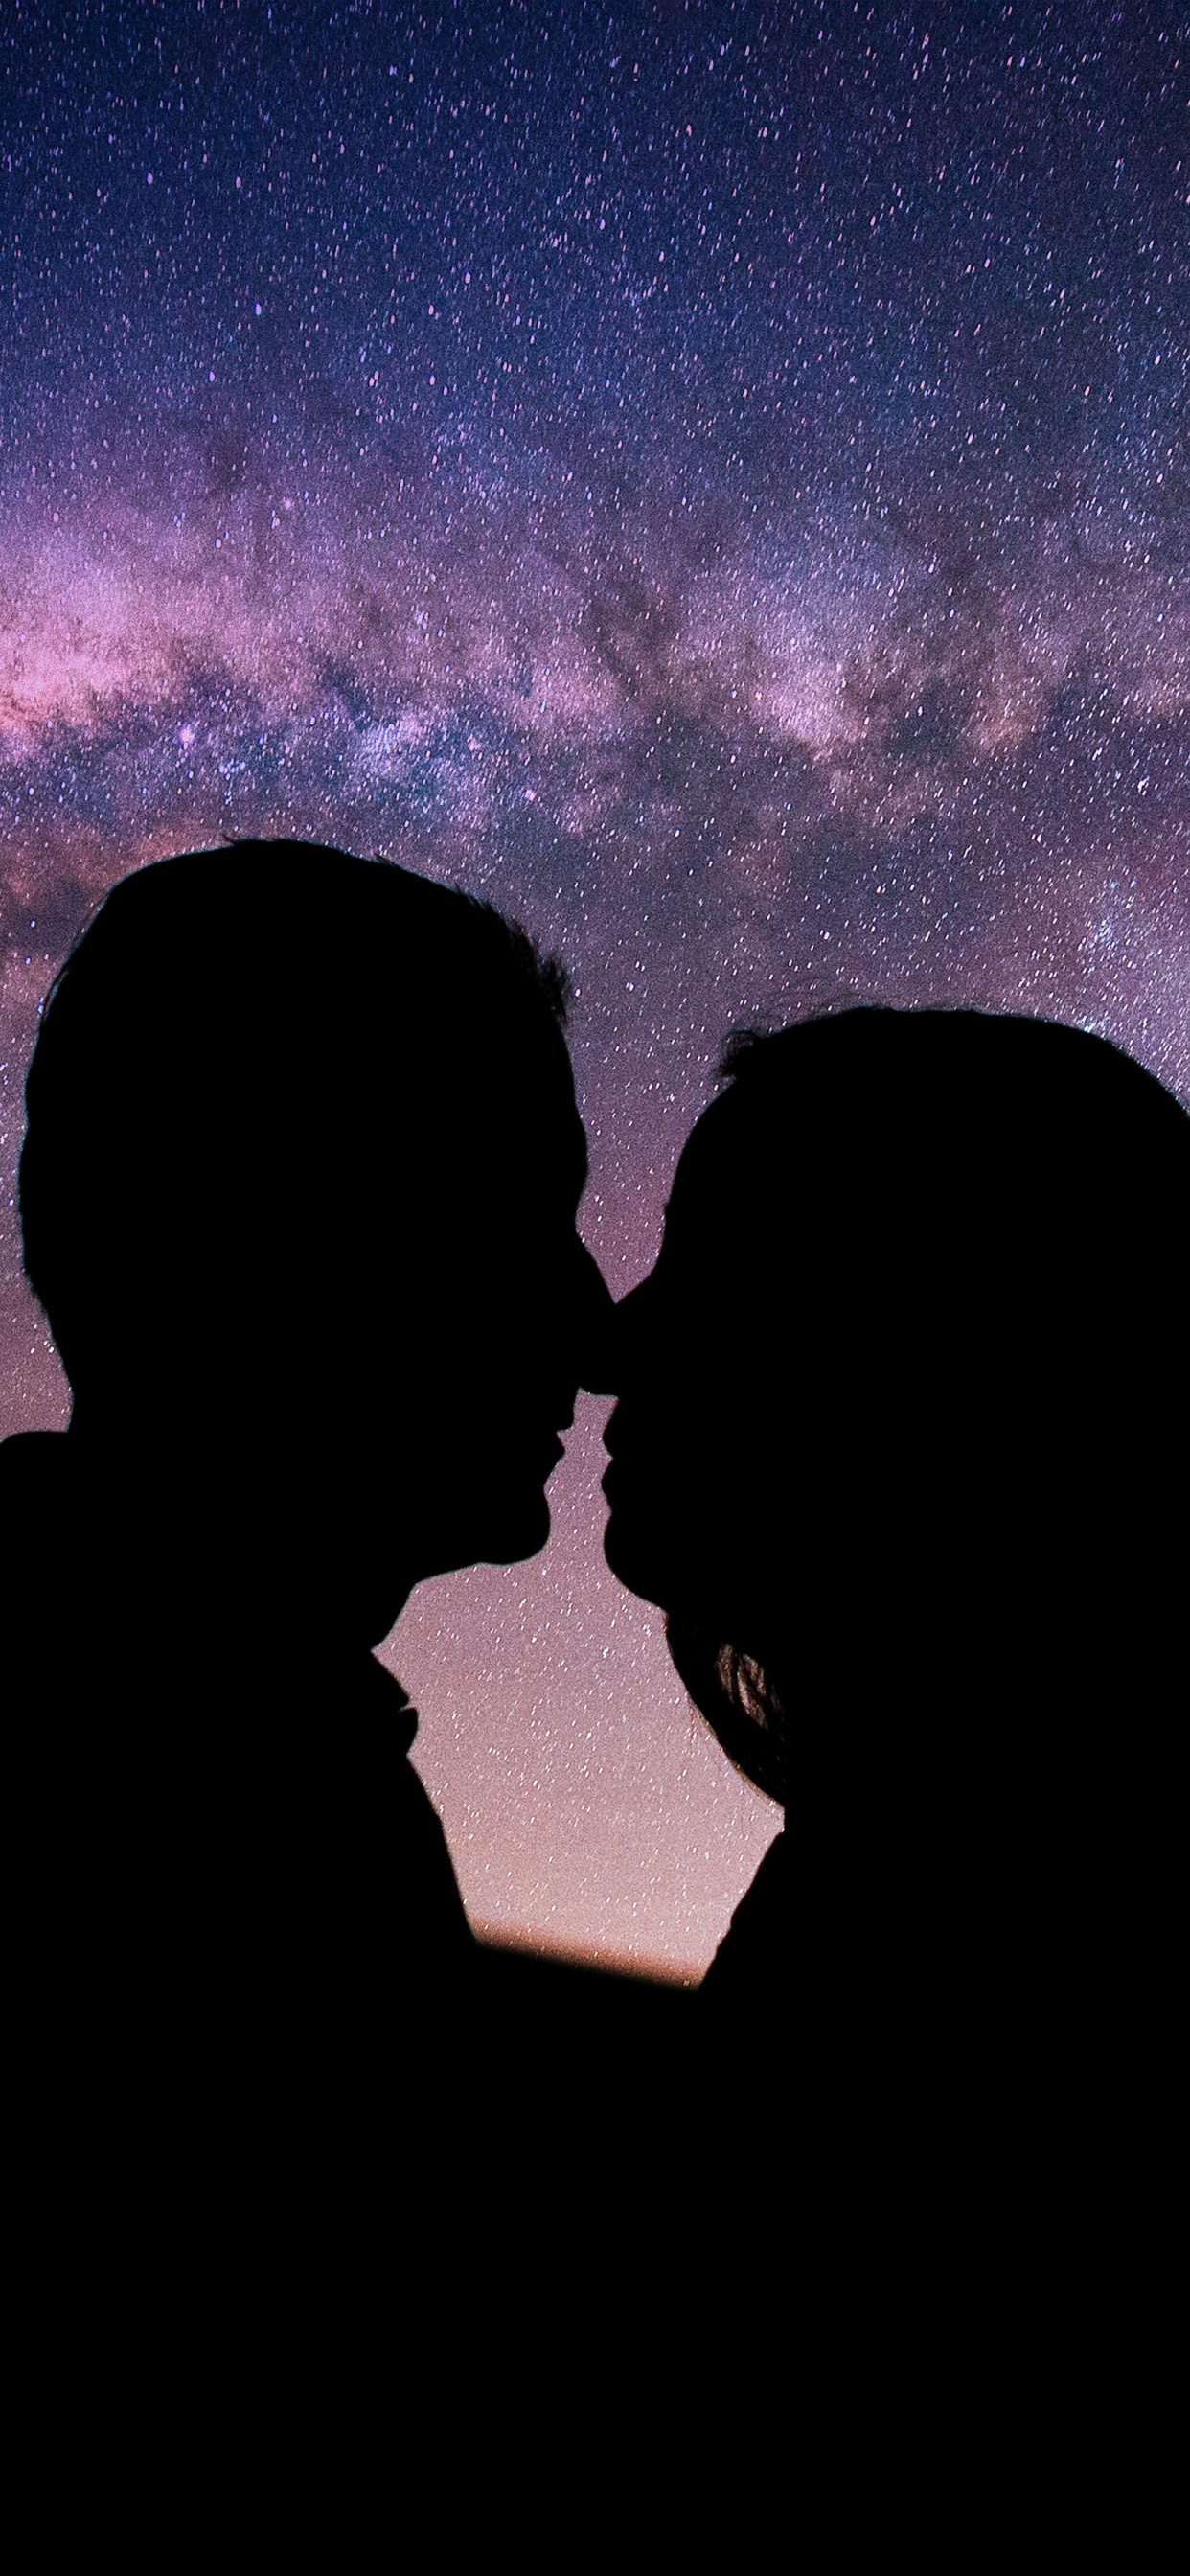 Amour, Nuit, Atmosphère, Interaction, Silhouette. Wallpaper in 1242x2688 Resolution